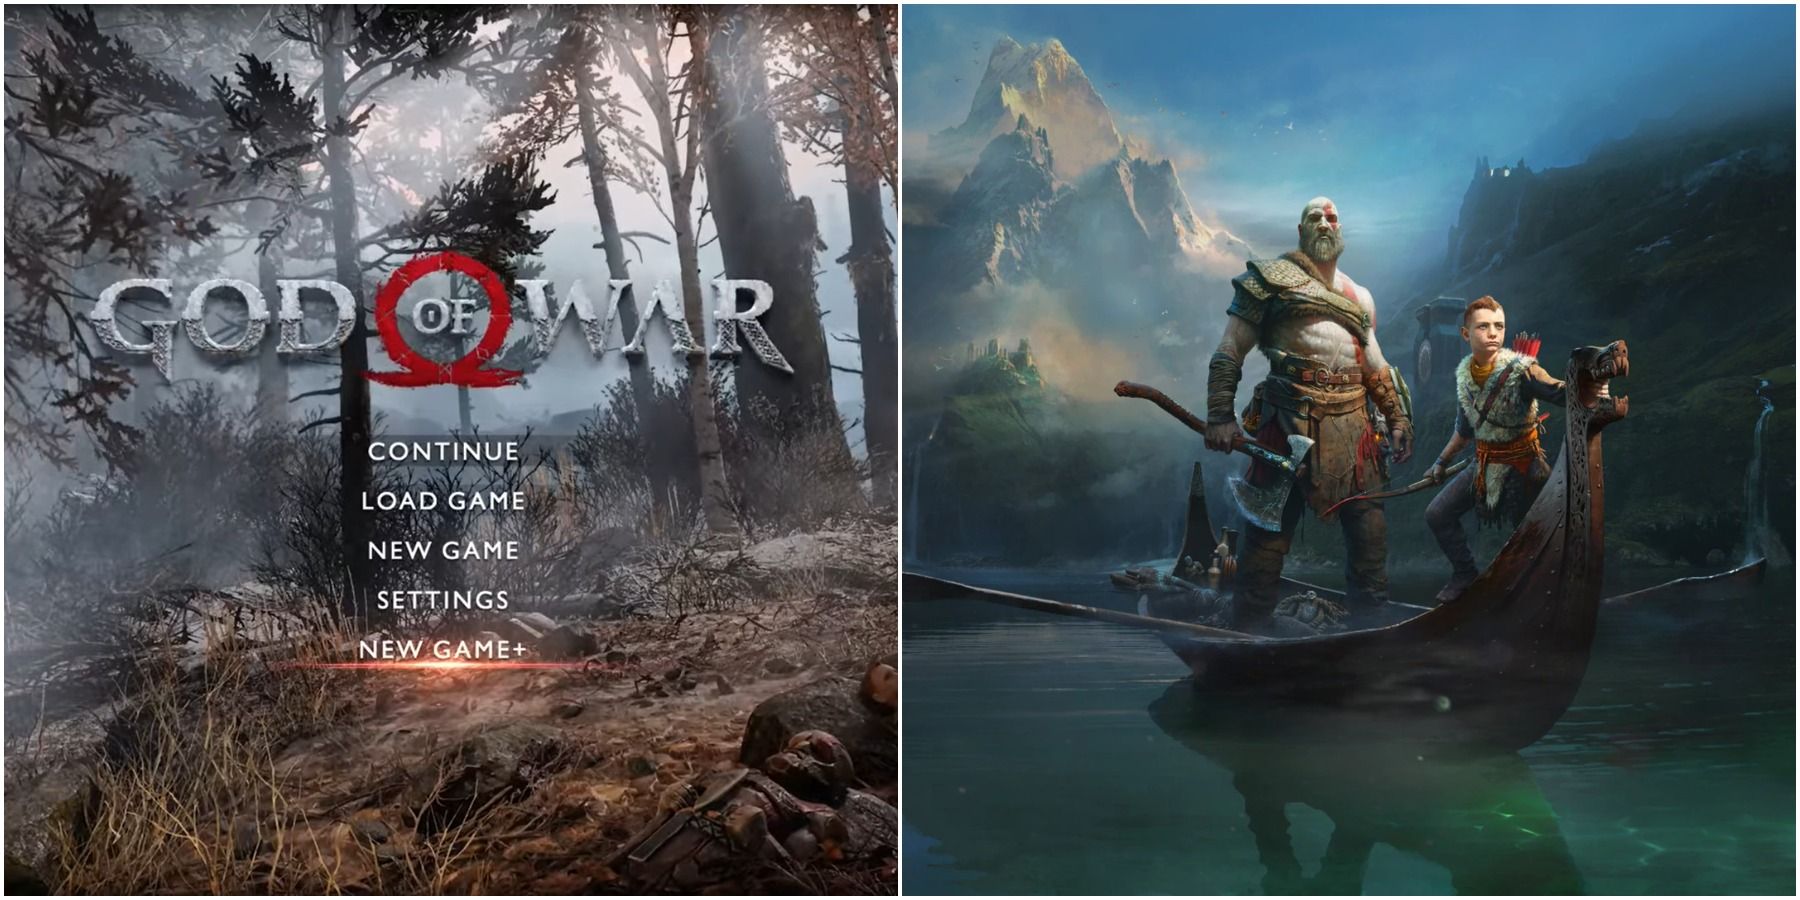 What Made God of War (2018) an Amazing Game